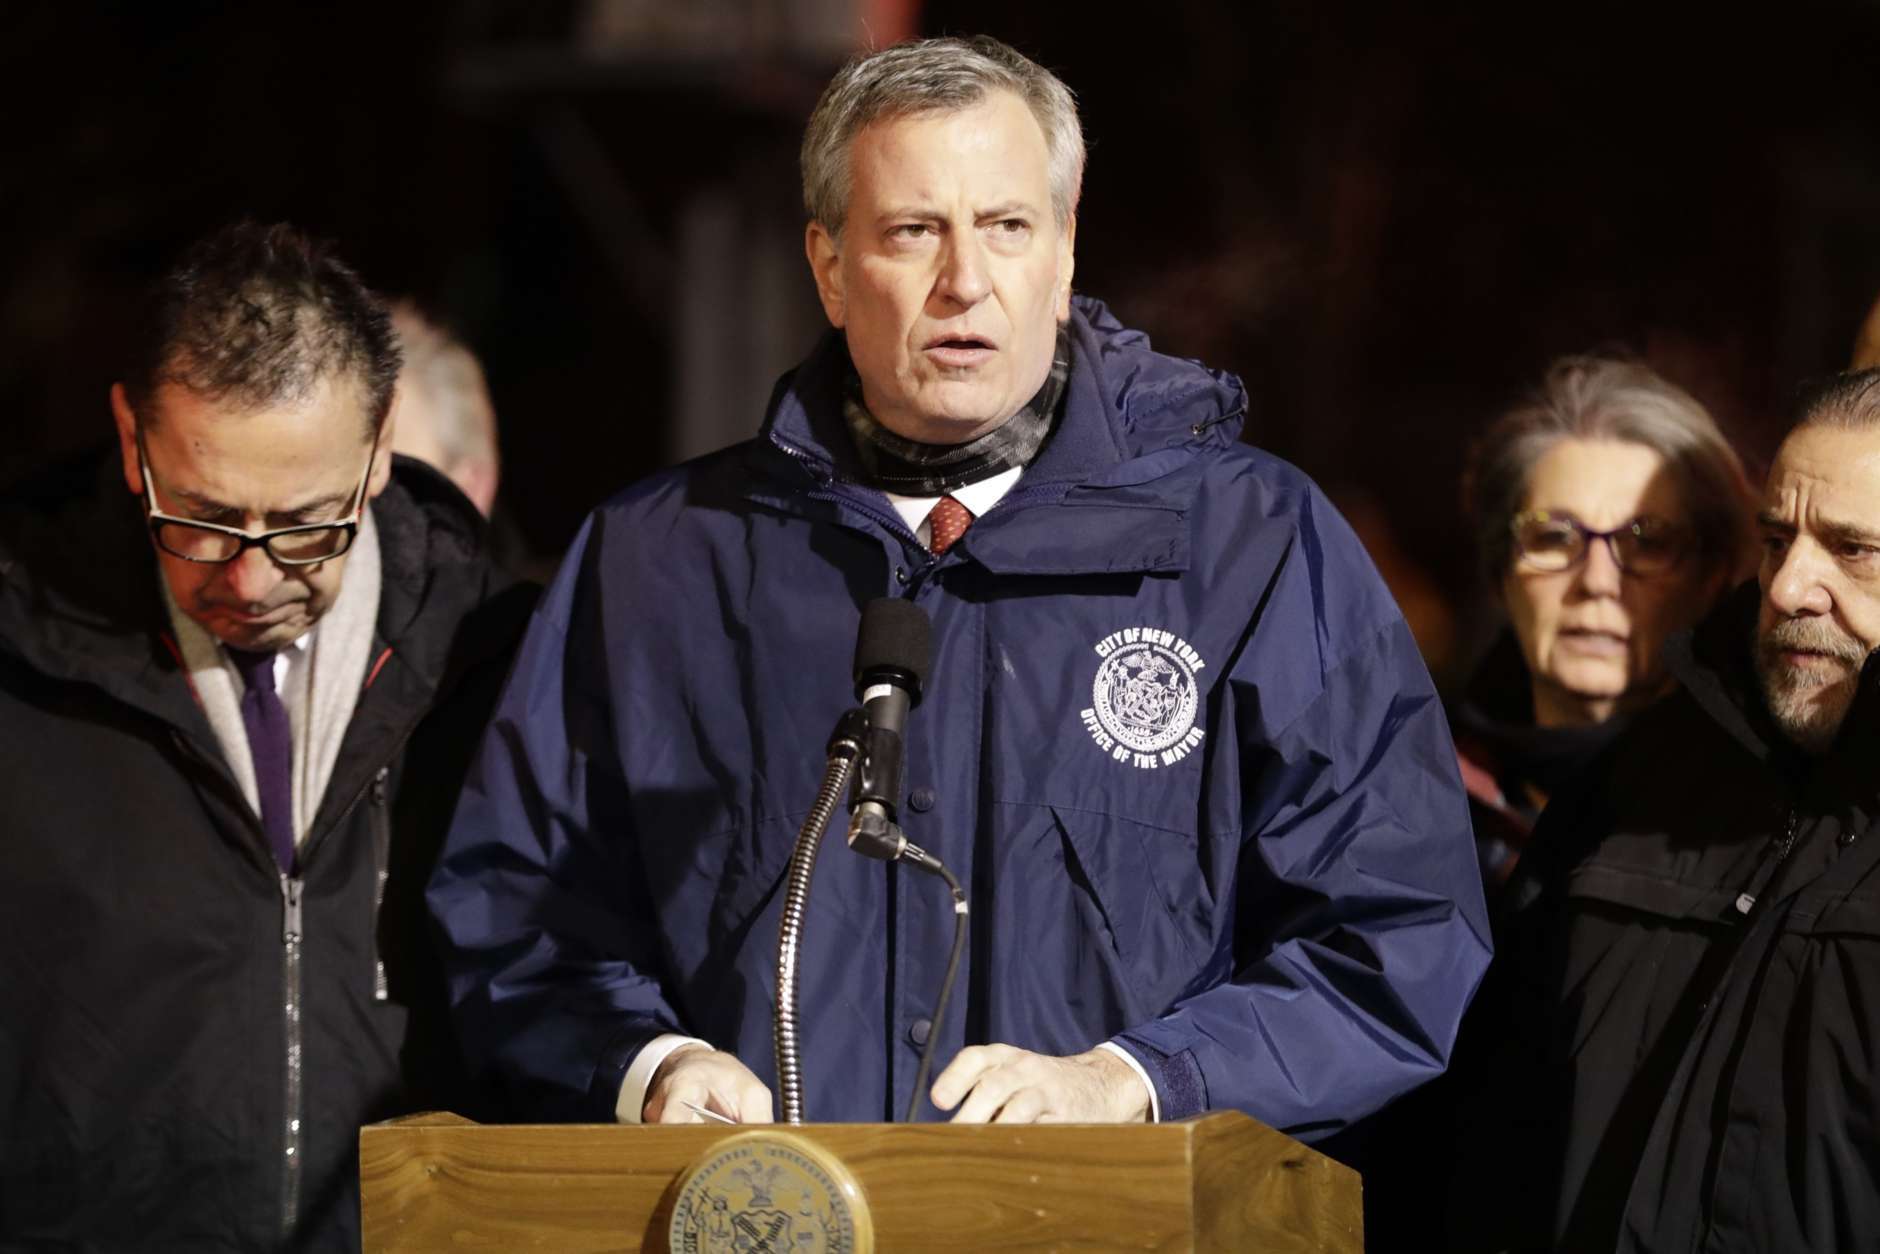 New York City Mayor Bill de Blasio speaks during a news conference after fire crews responded to a building fire Thursday, Dec. 28, 2017, in the Bronx borough of New York. (AP Photo/Frank Franklin II)